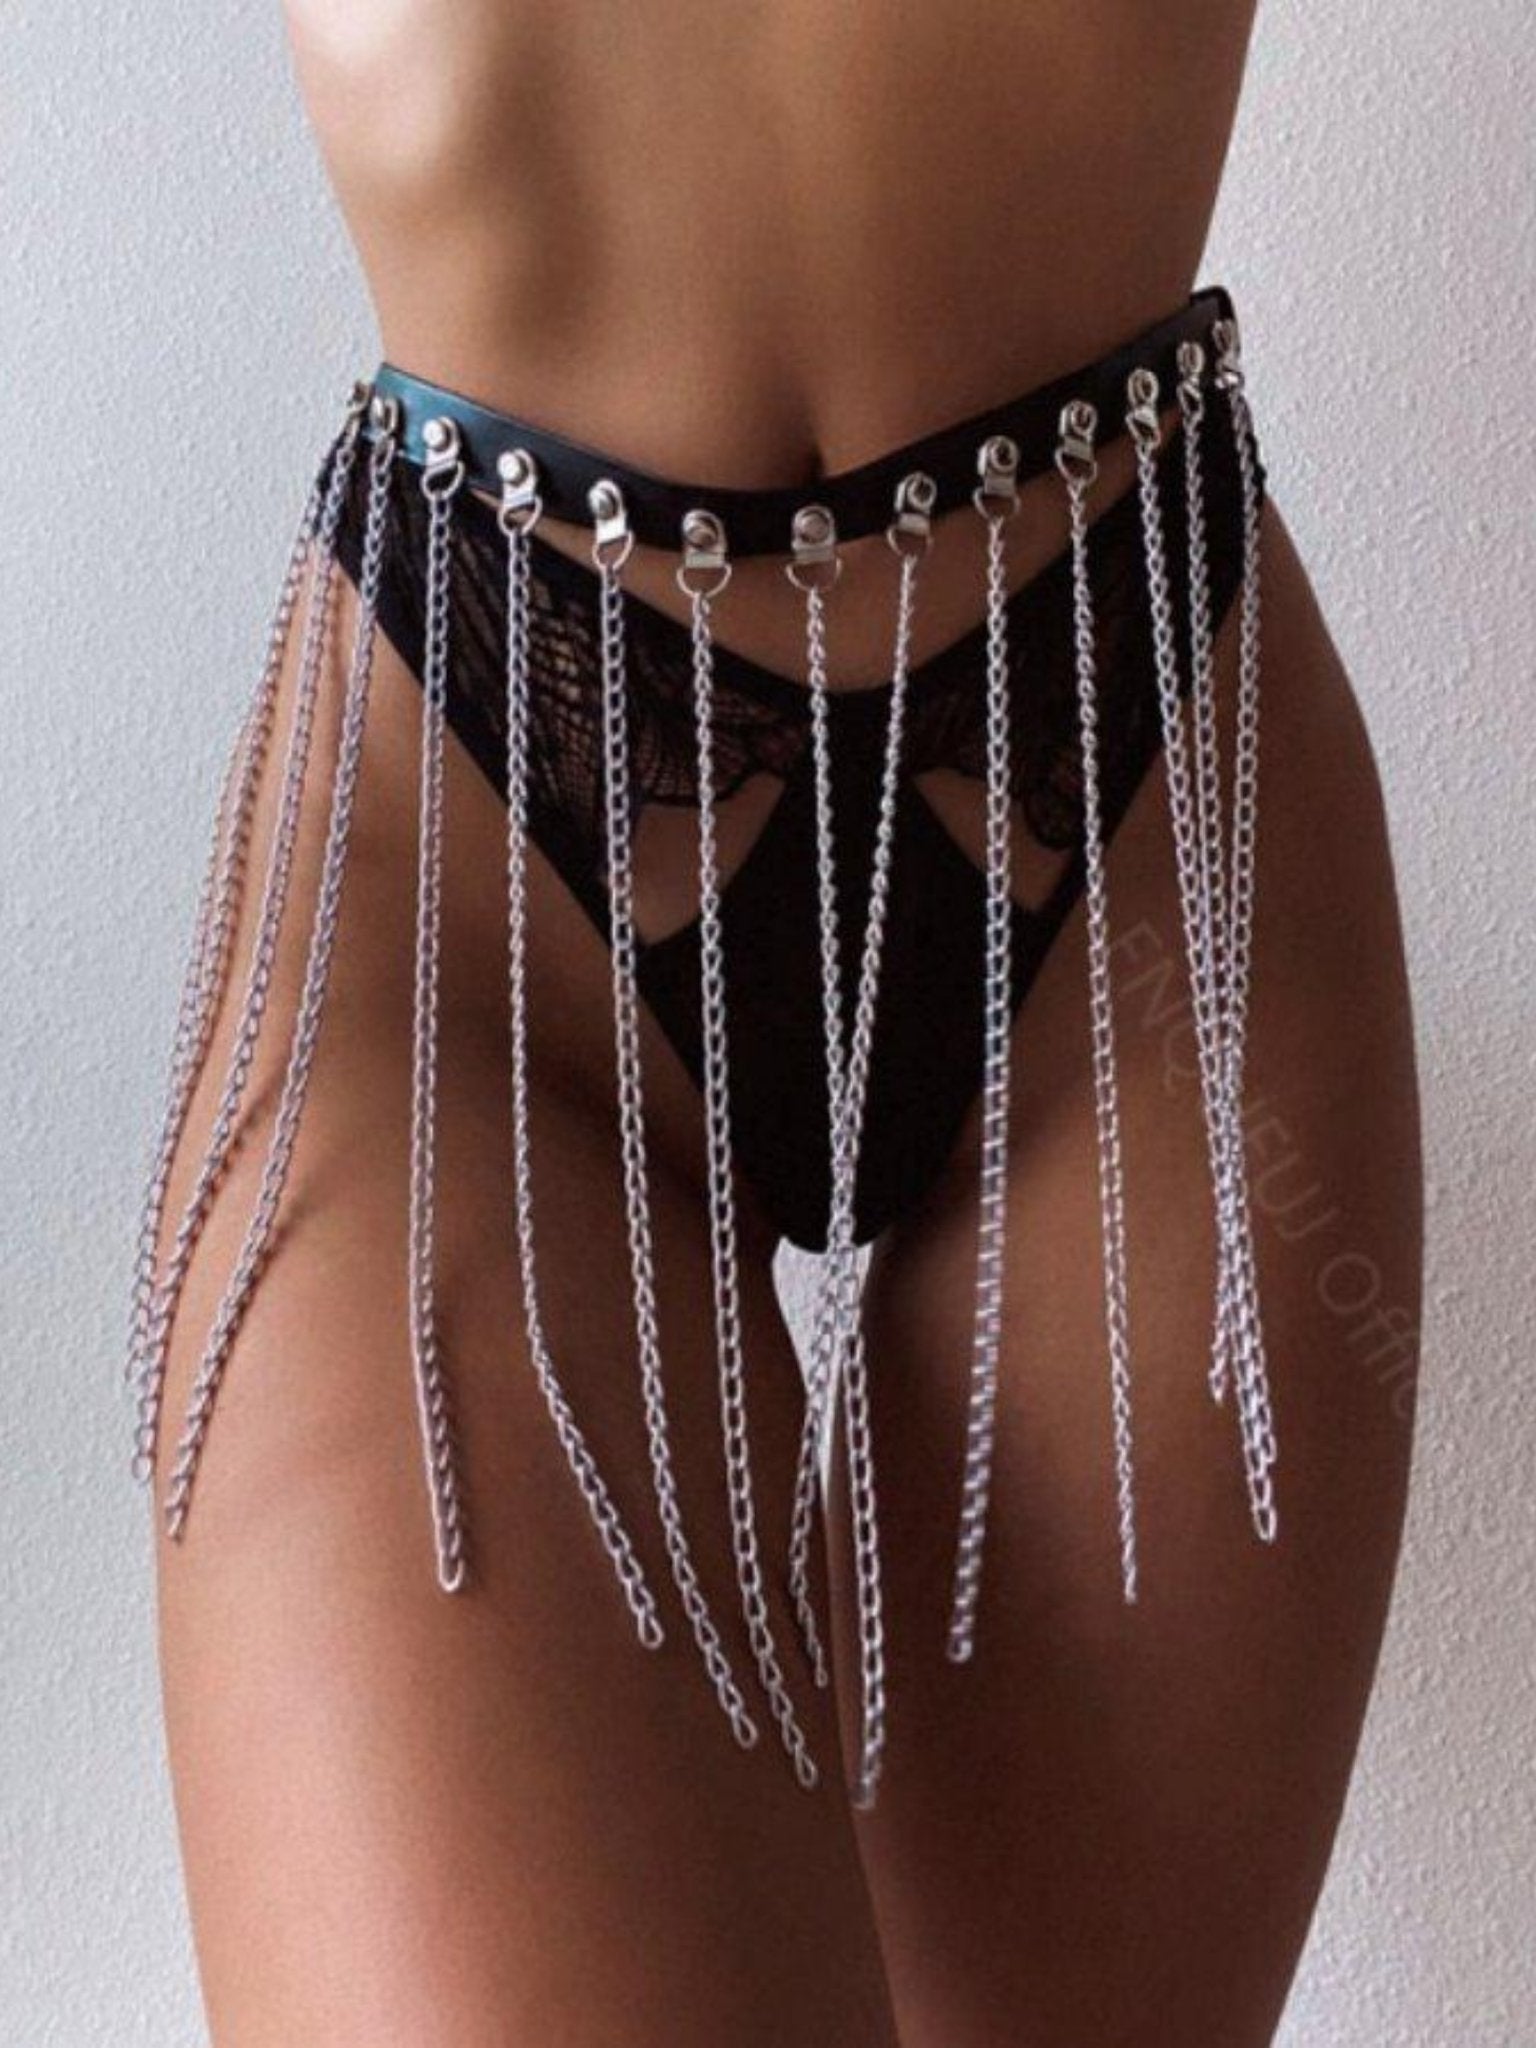 Jail House Body Chain - Freedom Rave Wear - Body Chains